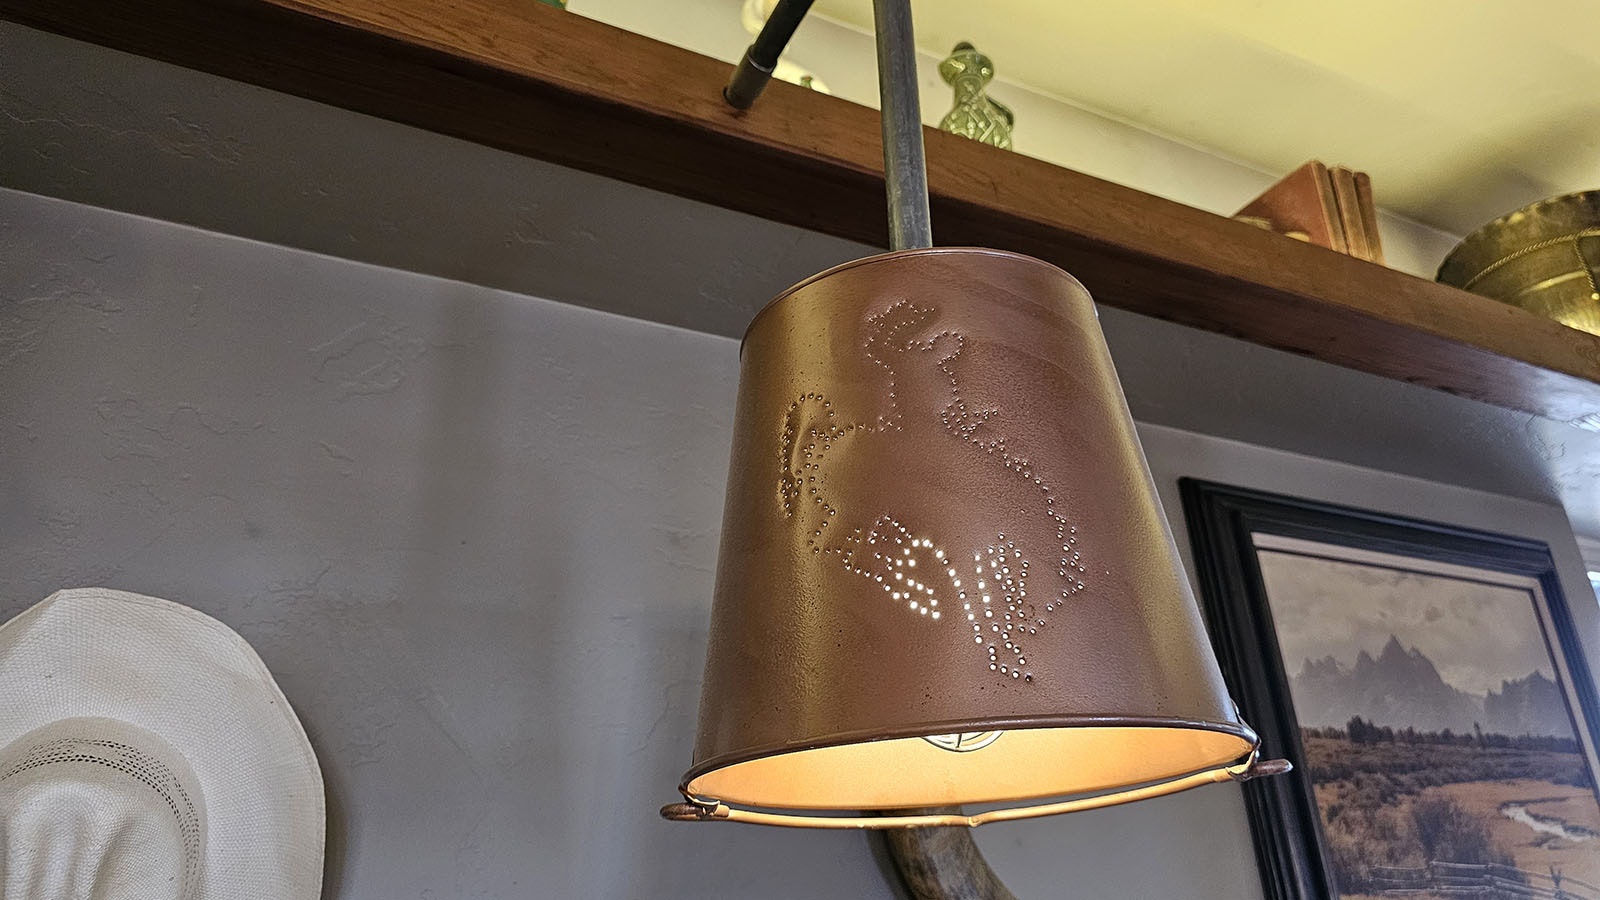 These lampshades are handmade by Dennis Smith.